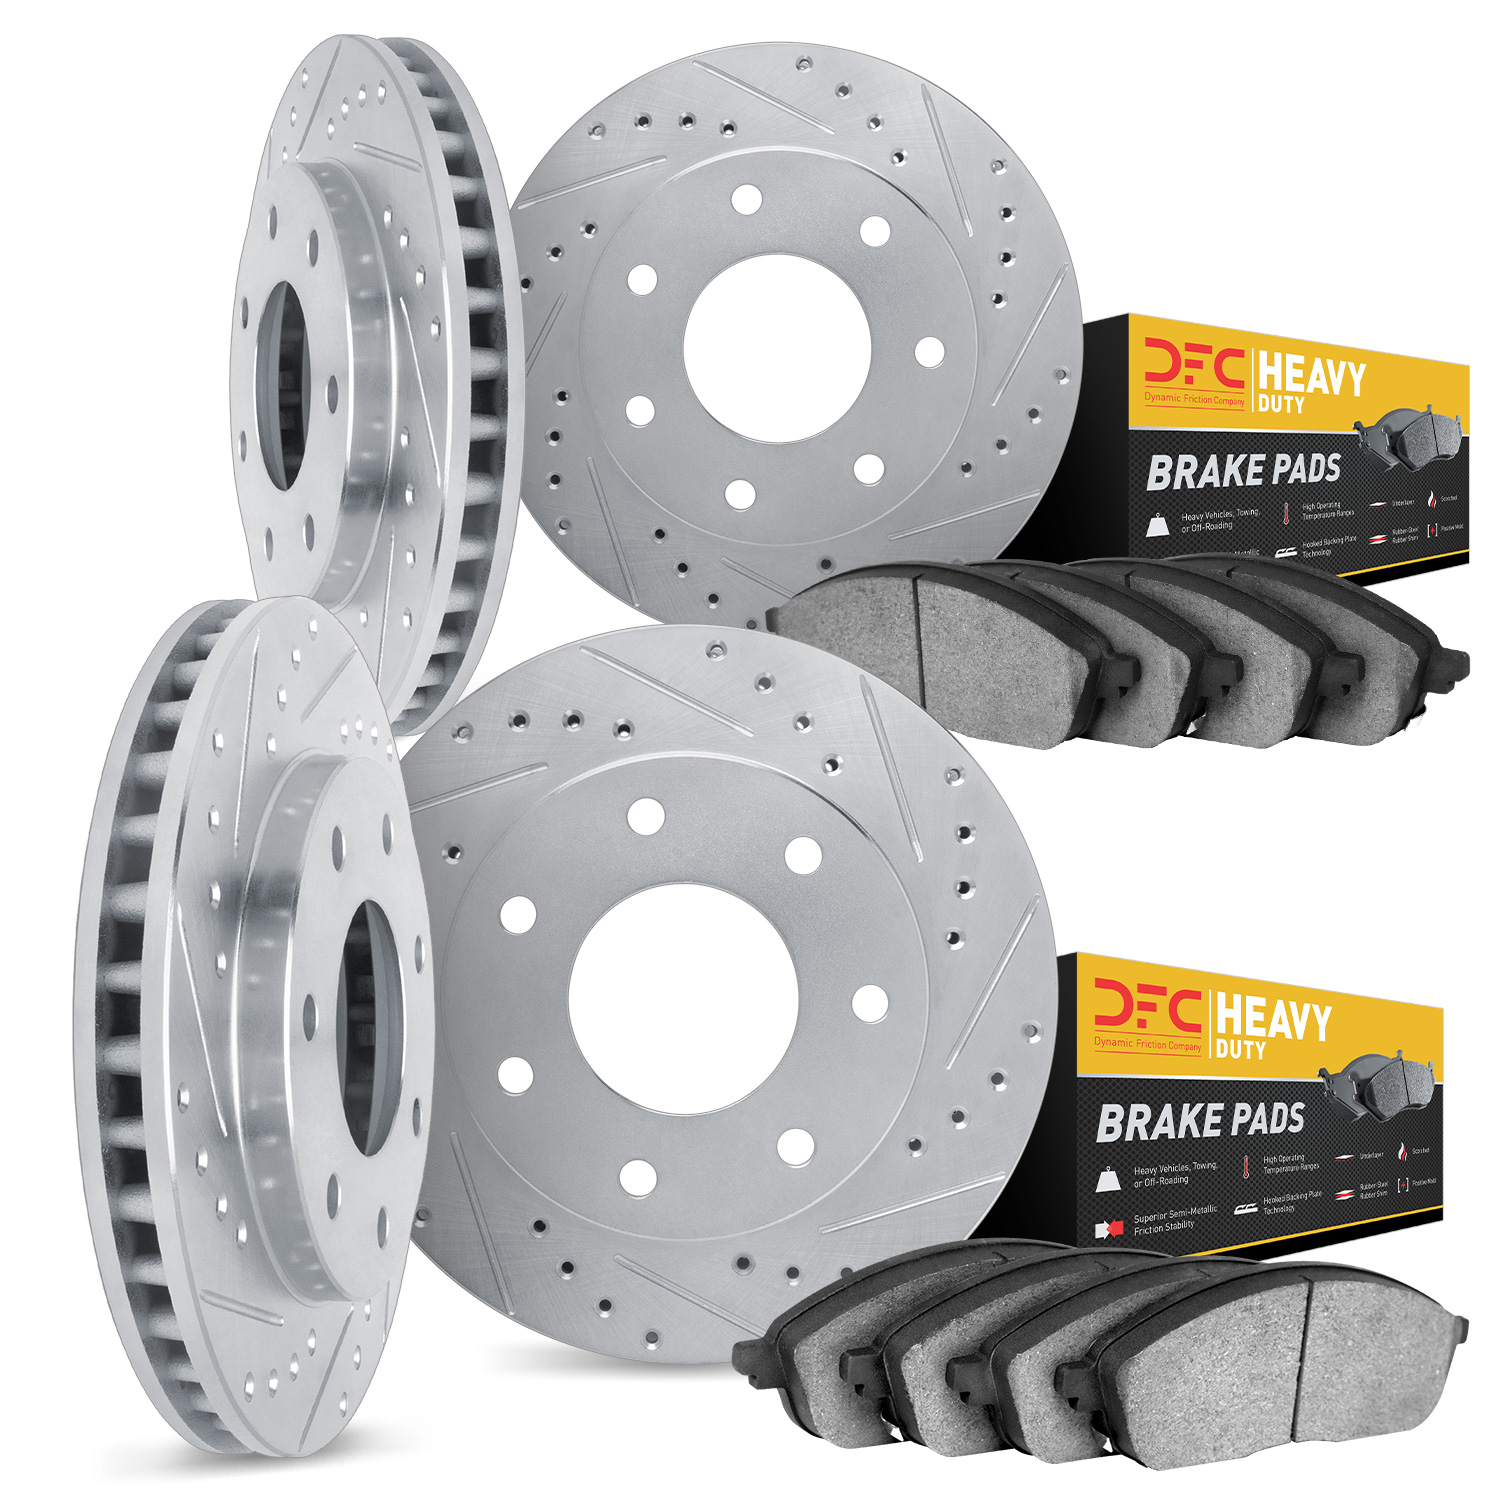 7204-99080 Drilled/Slotted Rotors w/Heavy-Duty Brake Pads Kit [Silver], 2004-2008 Ford/Lincoln/Mercury/Mazda, Position: Front an